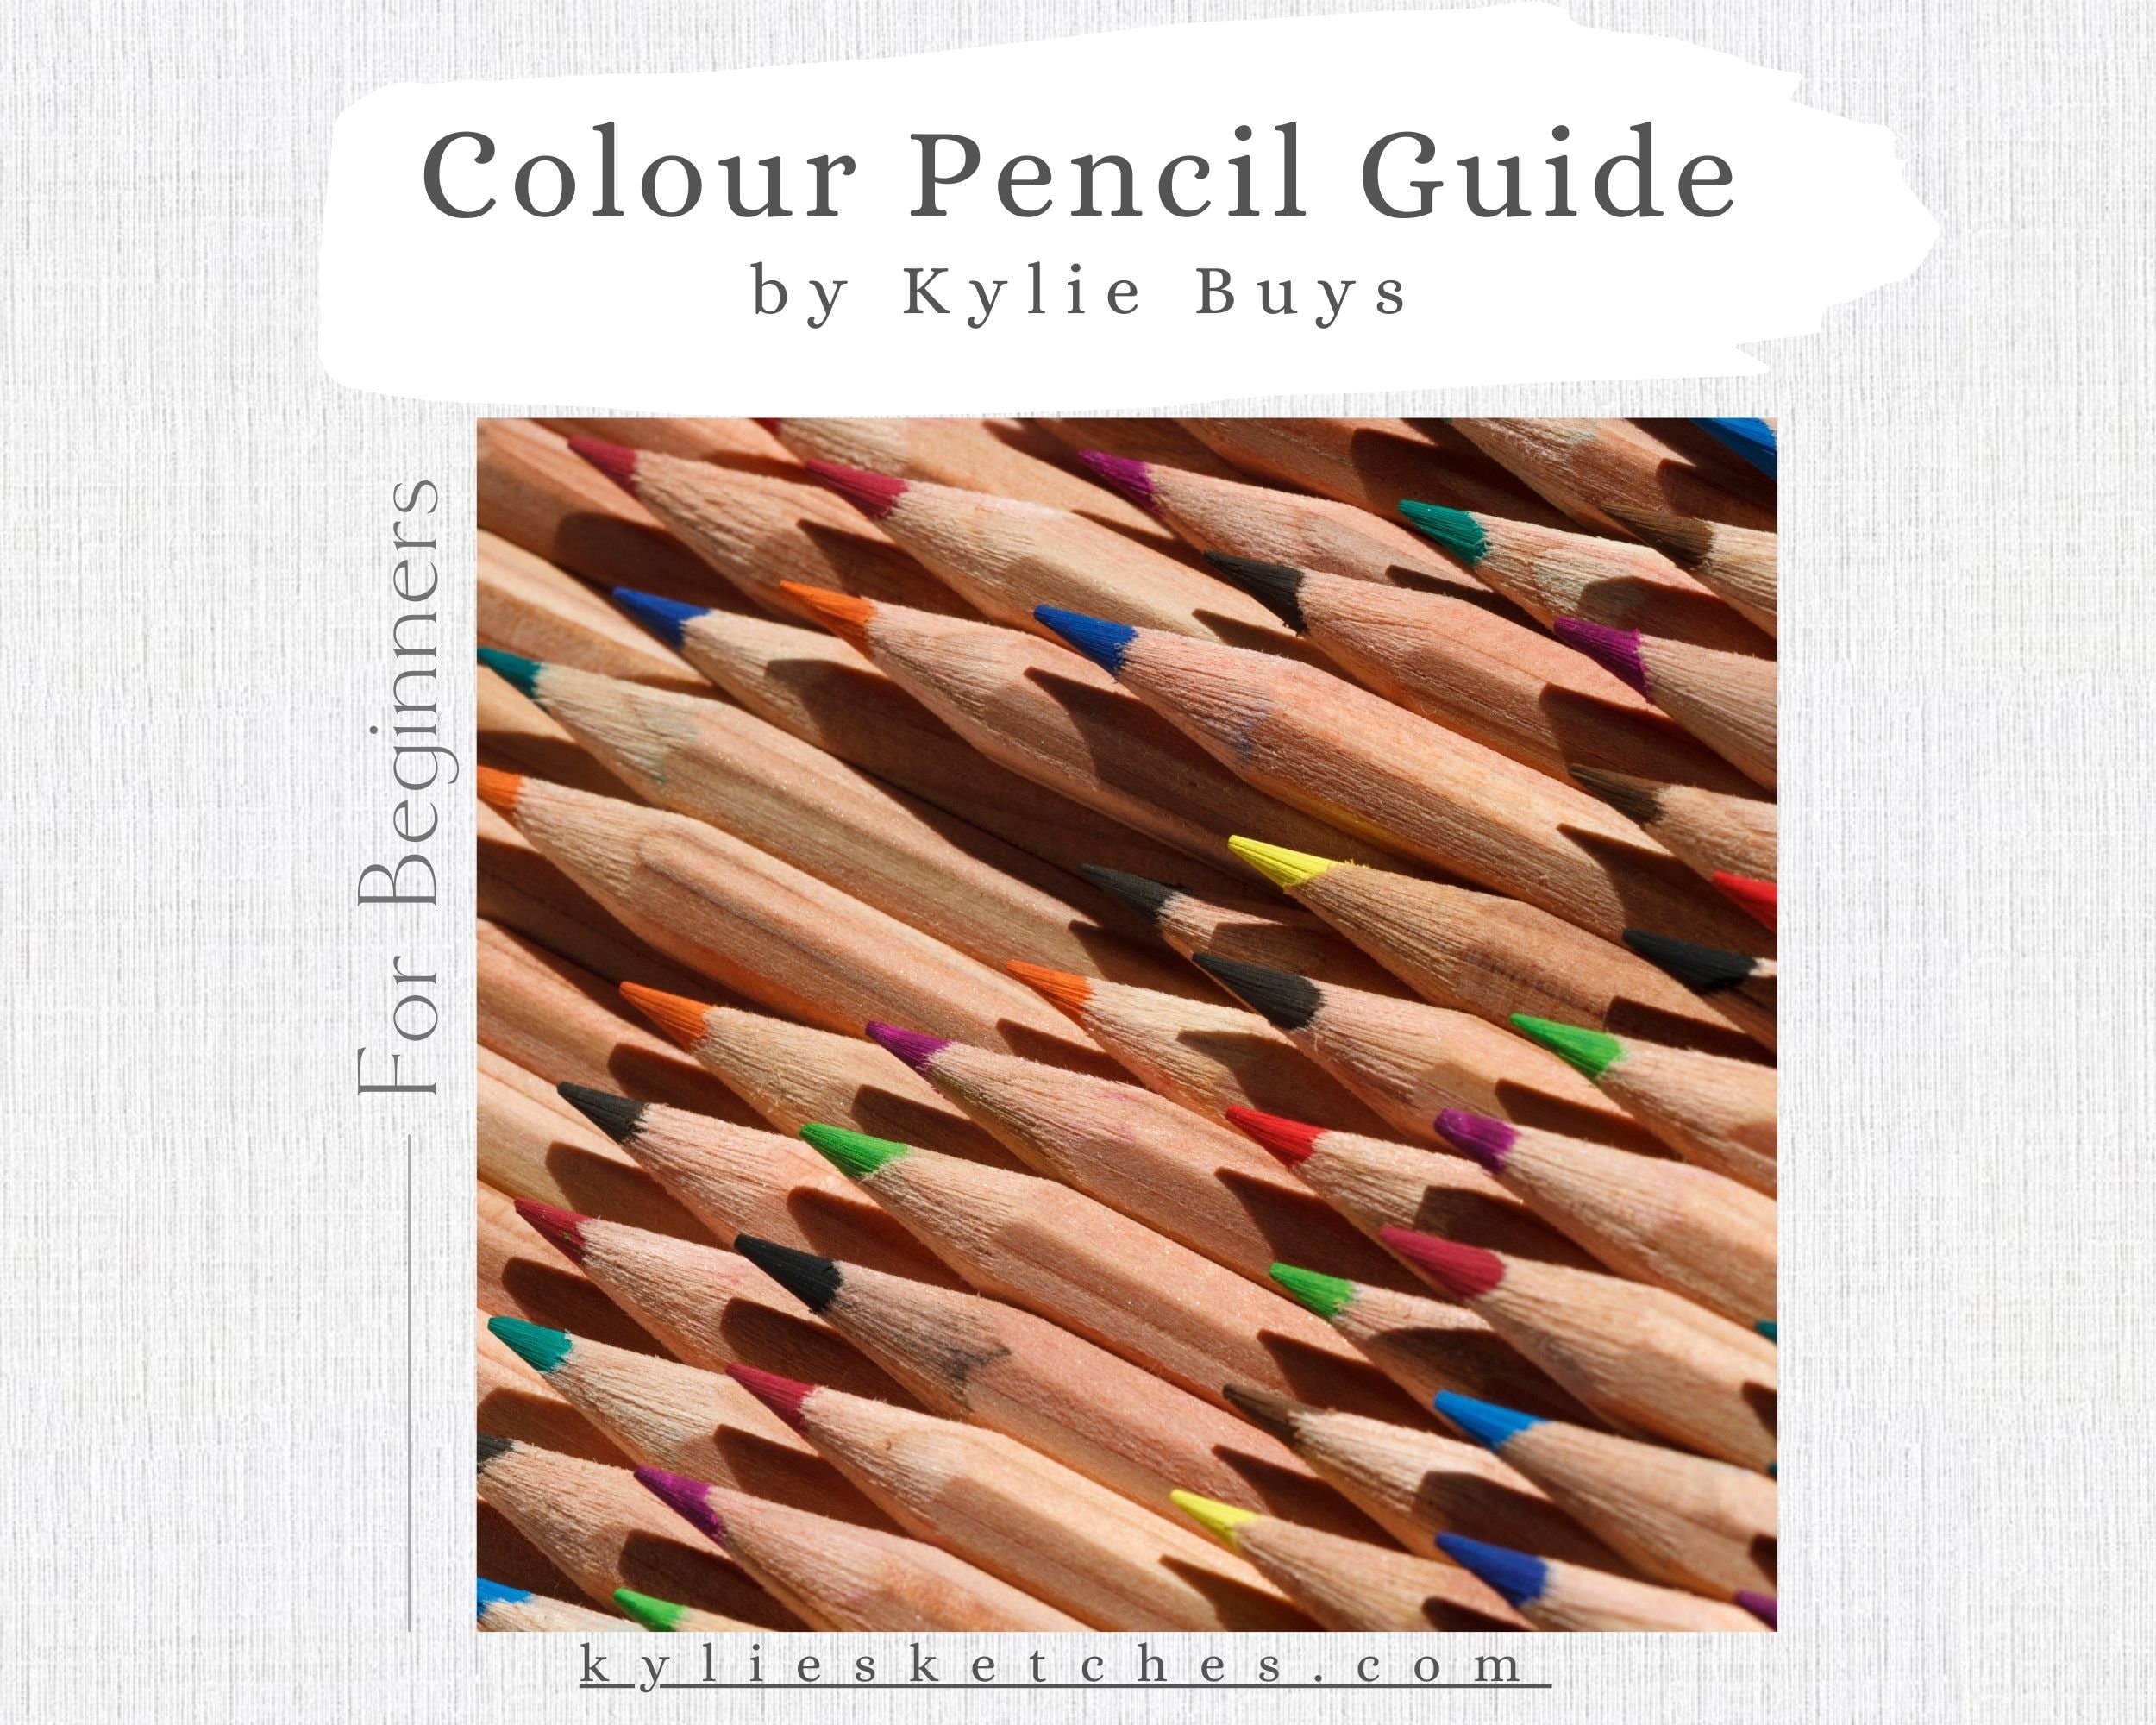 LUMINANCE Colored Pencils Workbook, Color Combinations and Color